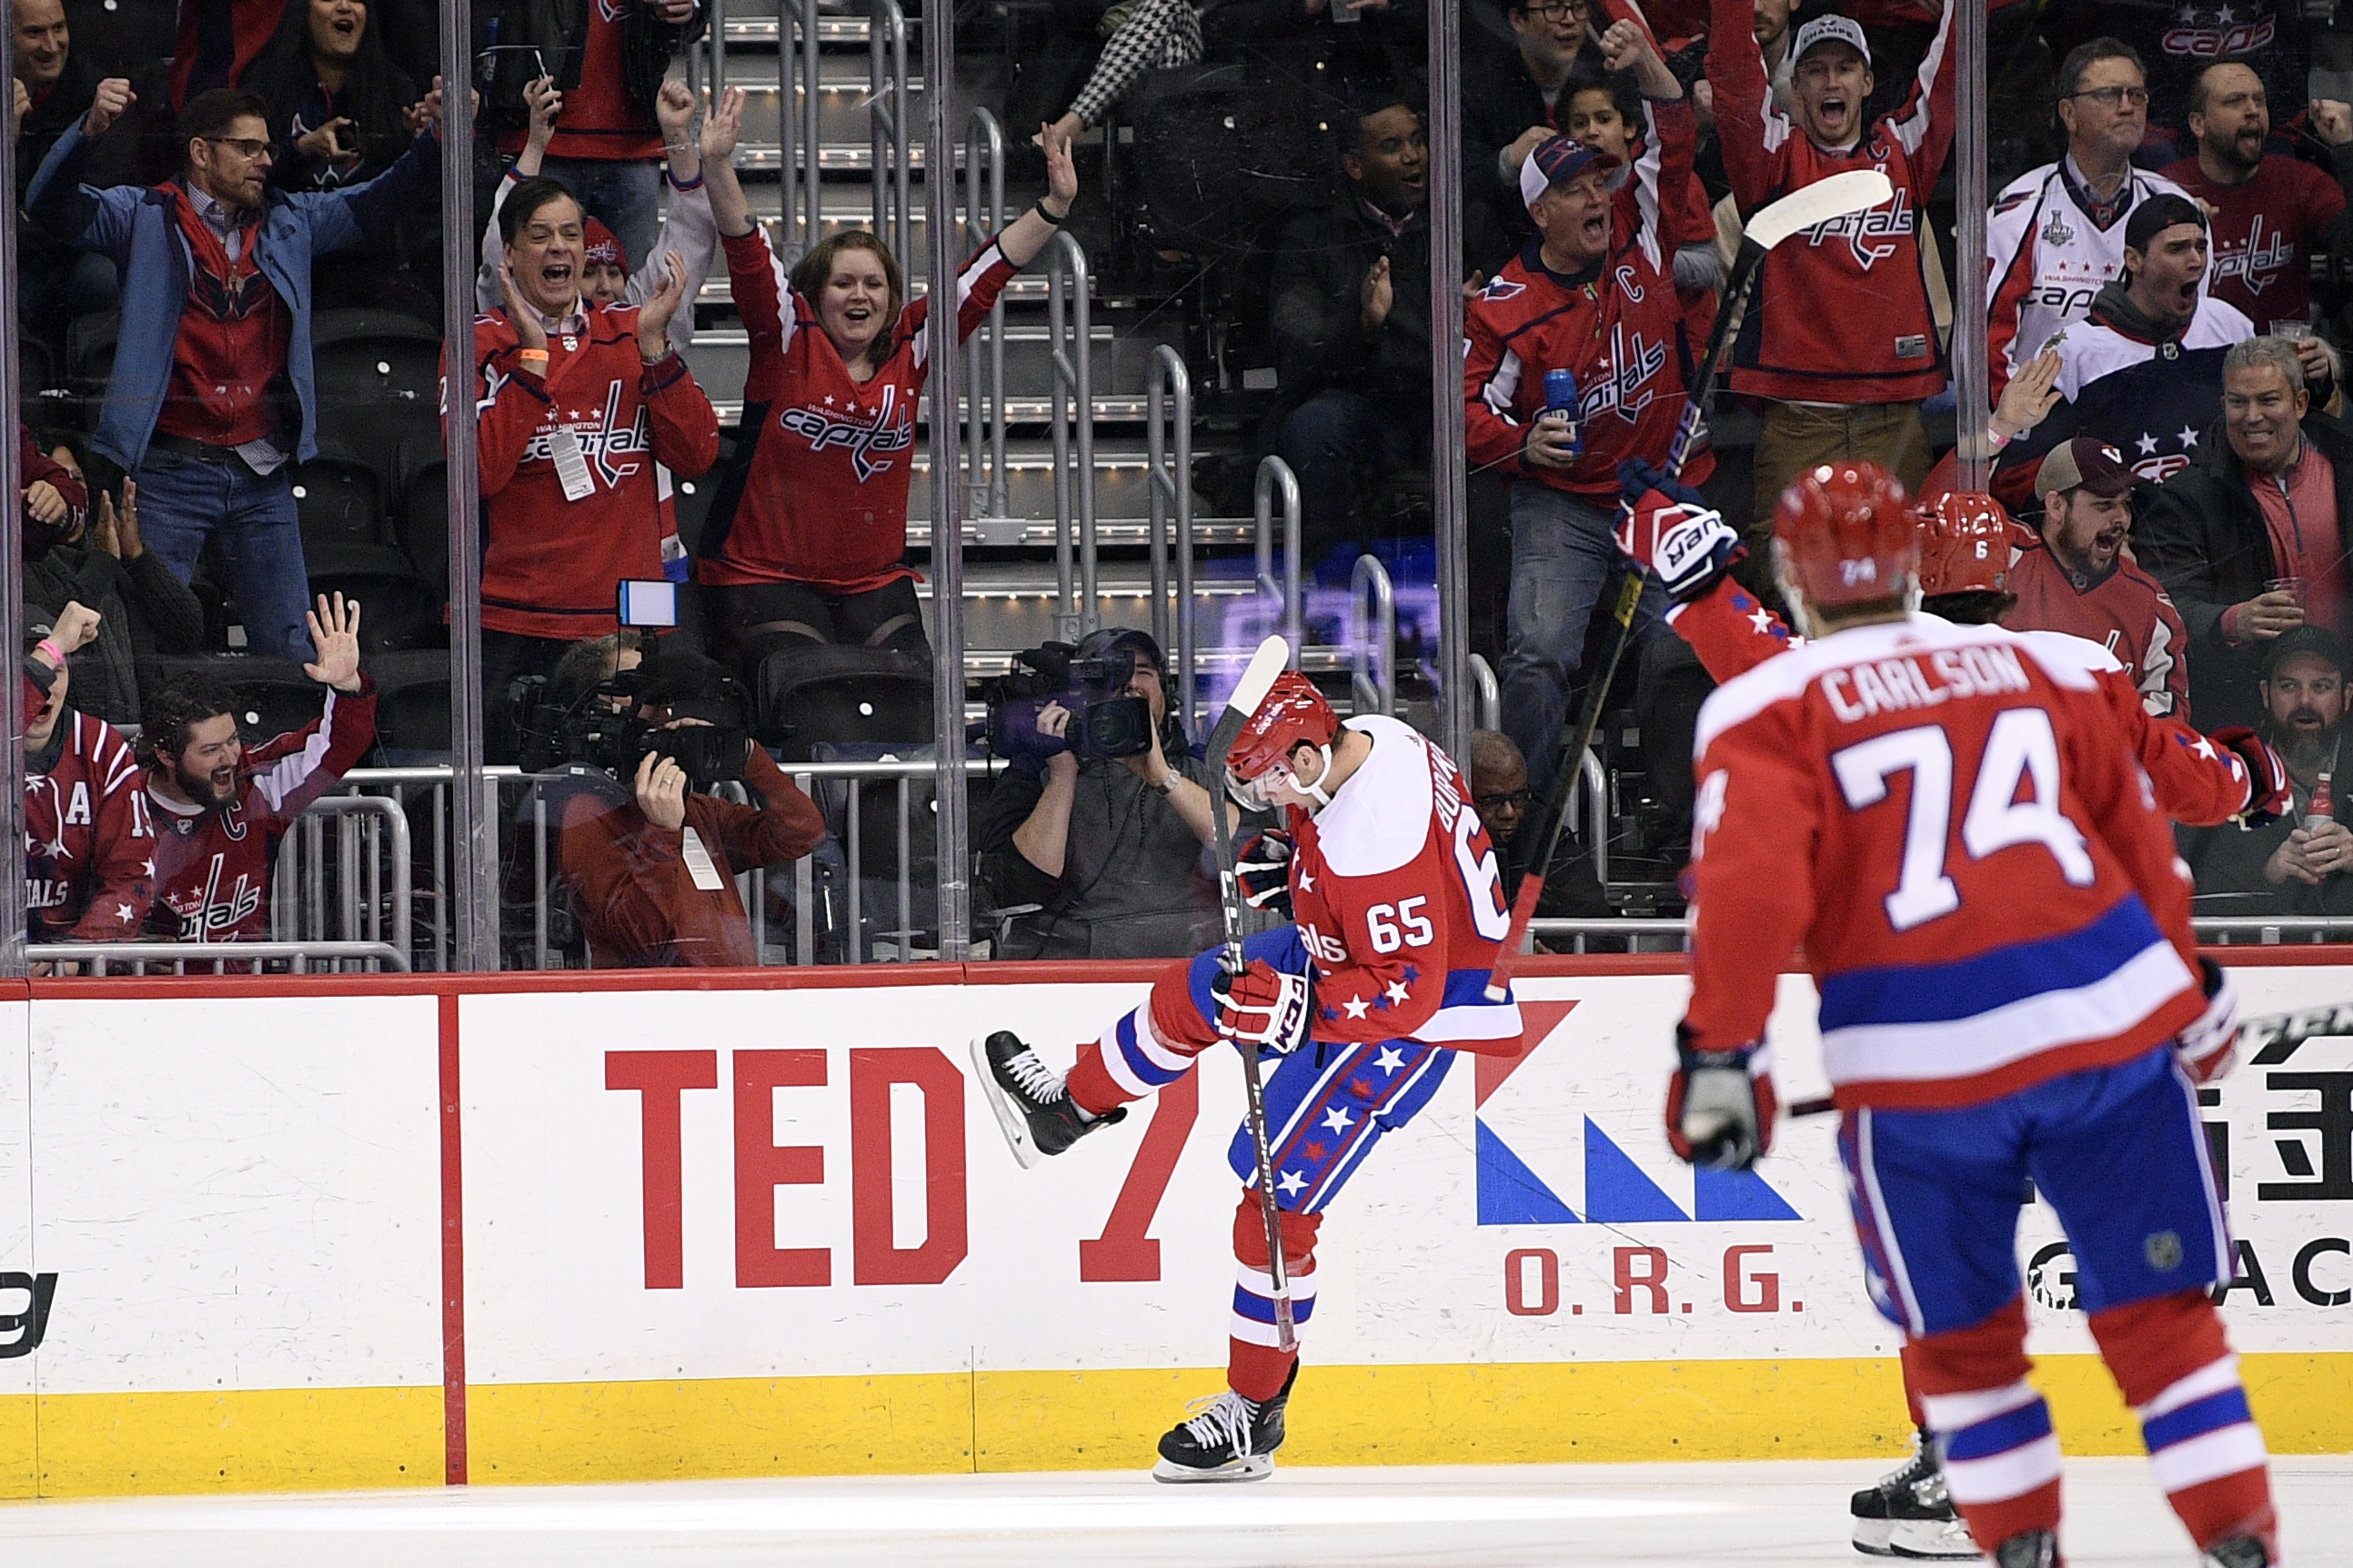 Capitals extend win streak to 6 with 3-0 win over Devils